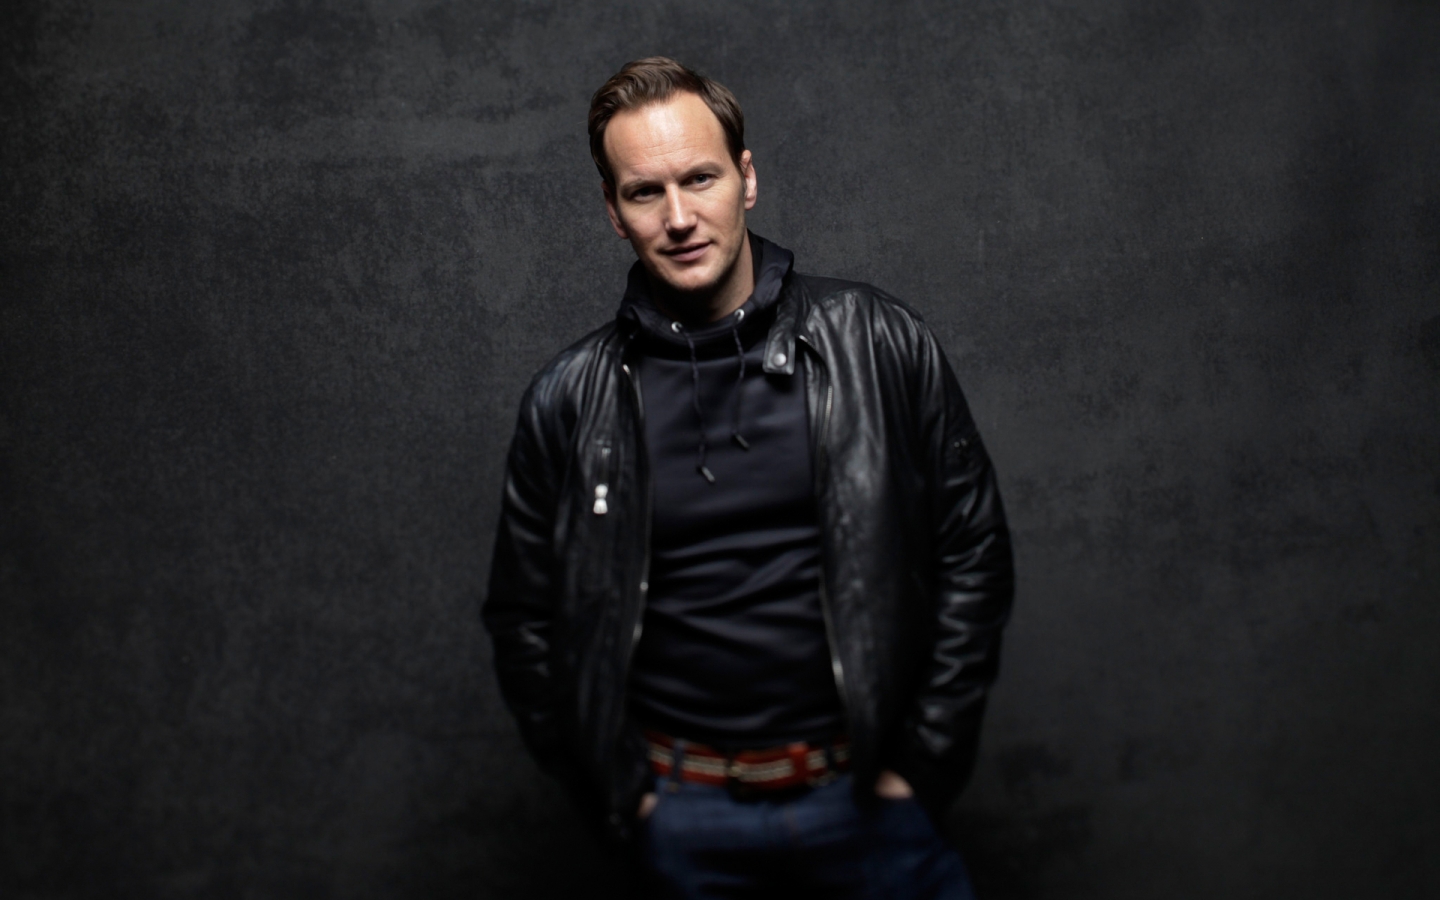  Patrick Wilson  for 1440 x 900 widescreen resolution